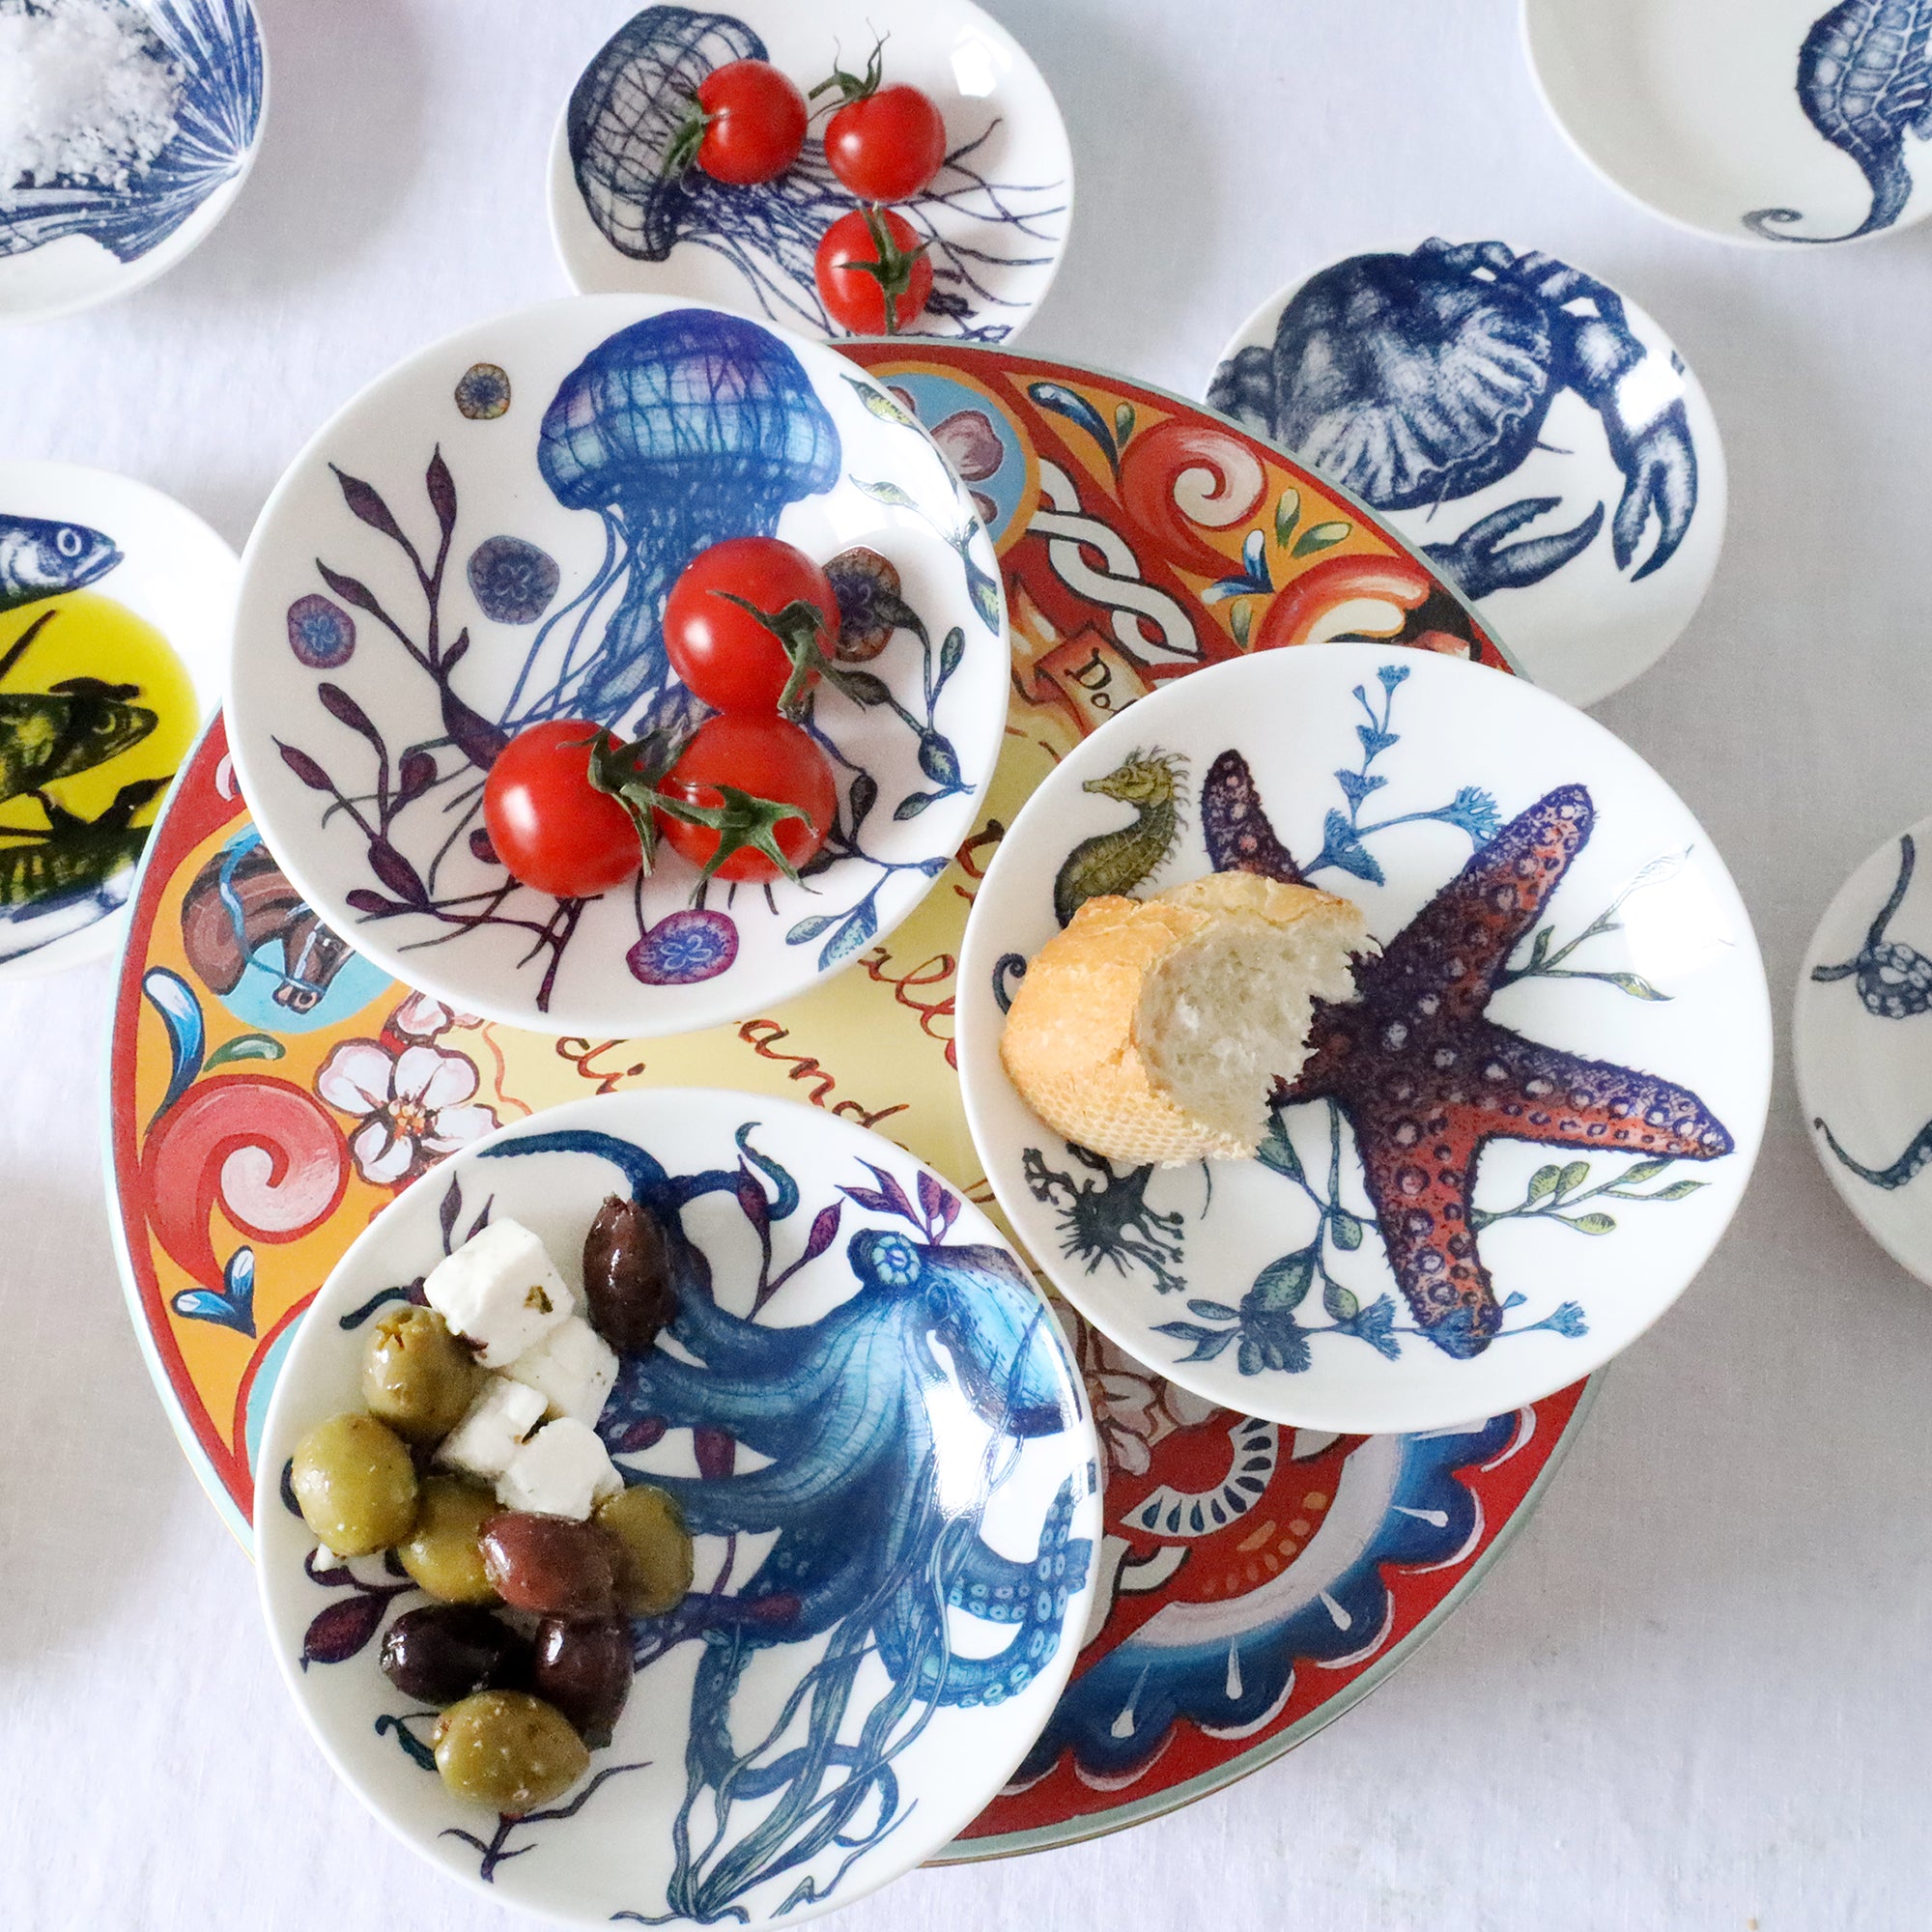 Nibbles bowl in Bone China in our colourful Reef range in the Octopus design placed on a brightly coloured tin with other nibbles bowls from our Reef range.All bowls have olives,bread ,tomatoes in.In the background you can see other items on the table